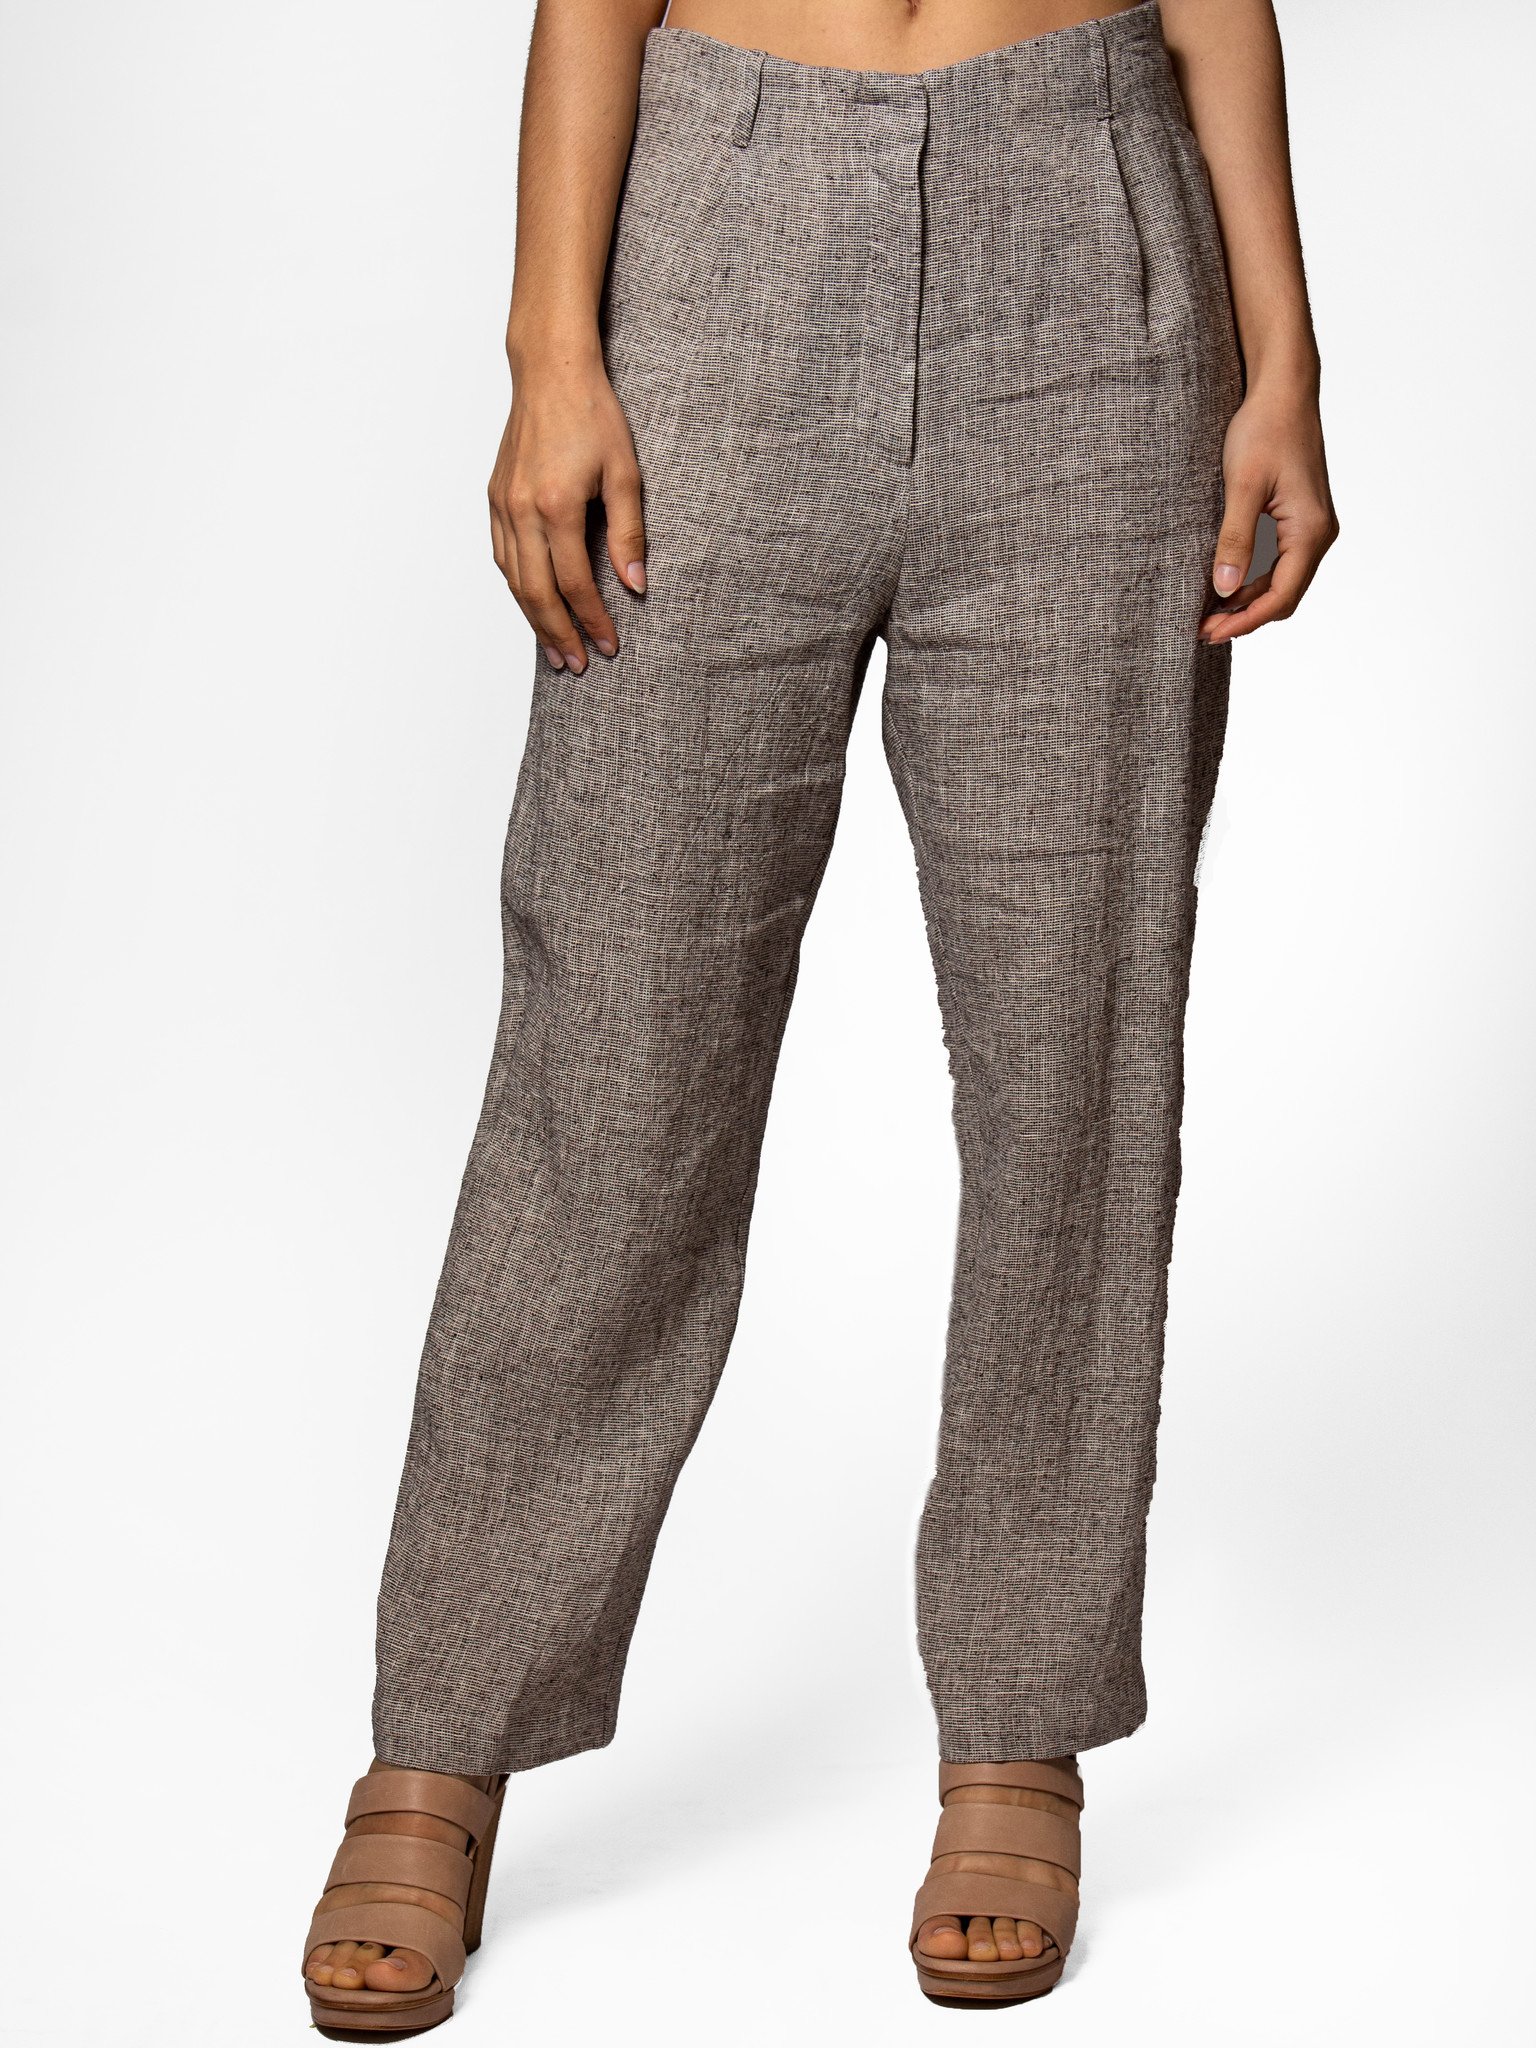 SKU:201-7145, LINEN TEXTURED PANT TAUPE - Alhambra | Women's Clothing ...